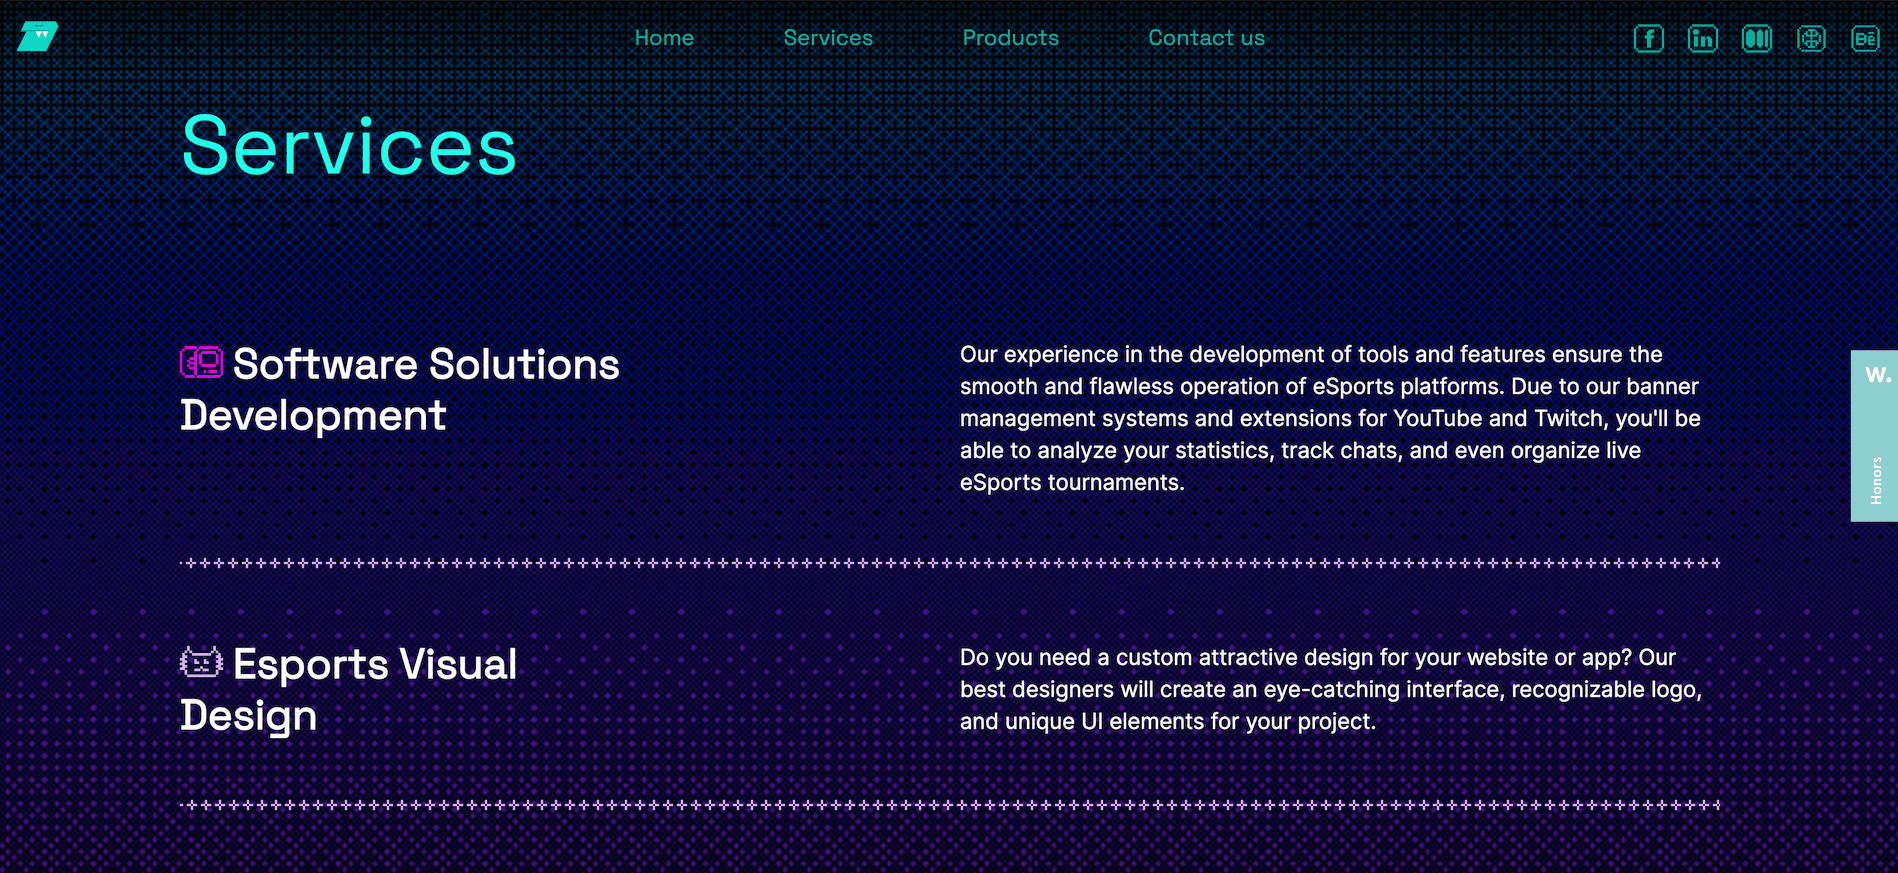 Screenshot of the 27 nreds website showing pixelated background design and neon colours